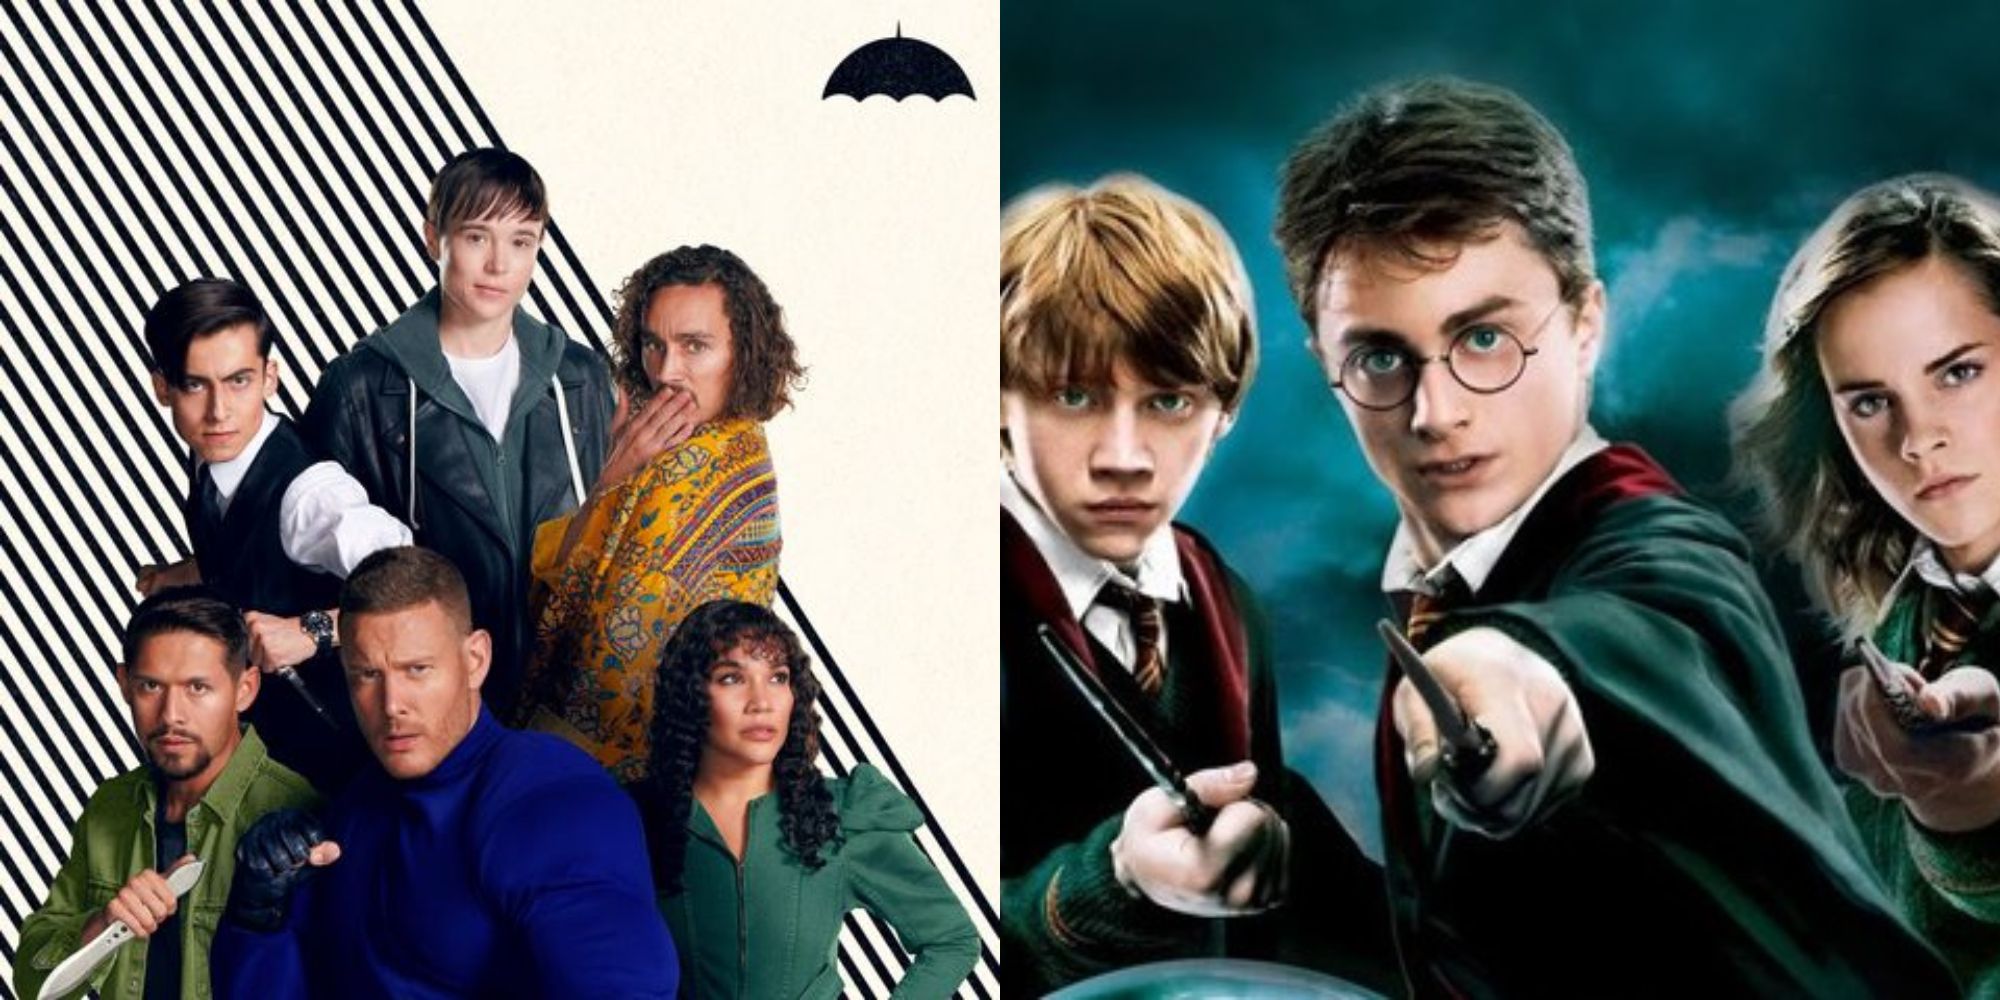 Split image showing the main characters from The Umbrella Academy and Harry Potter.